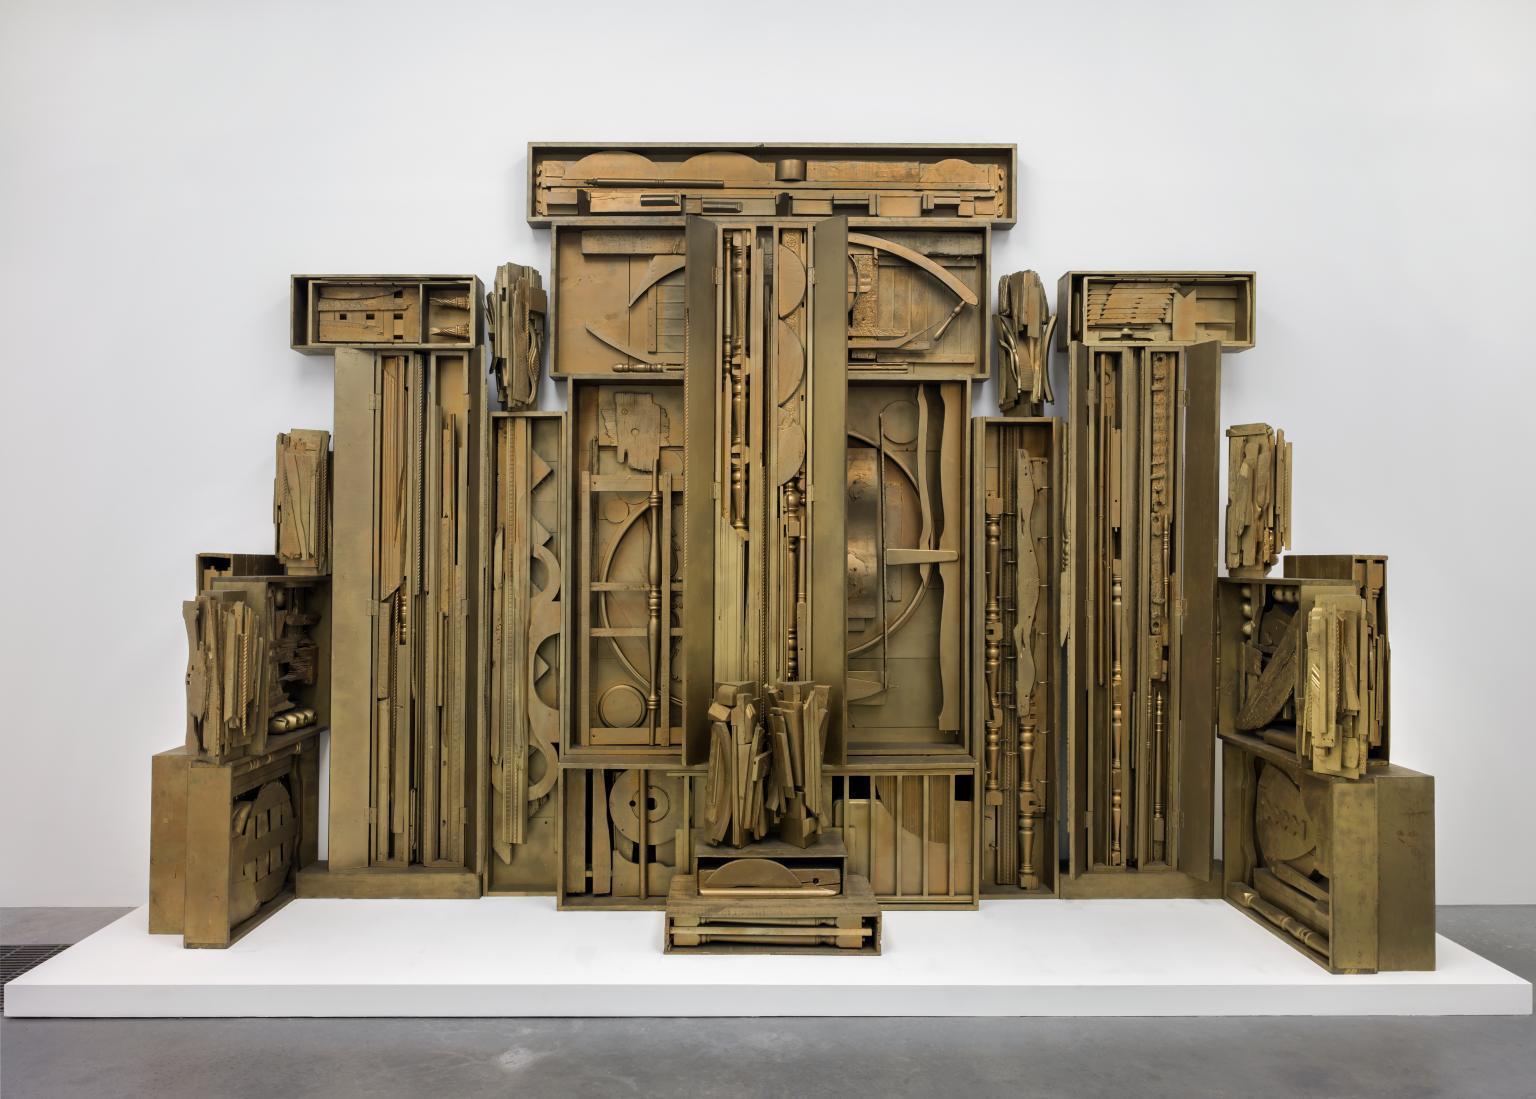 Louise Nevelson, An American Tribute to the British People, 1960&ndash;4, Courtesy ARS, NY and DACS, London 2017